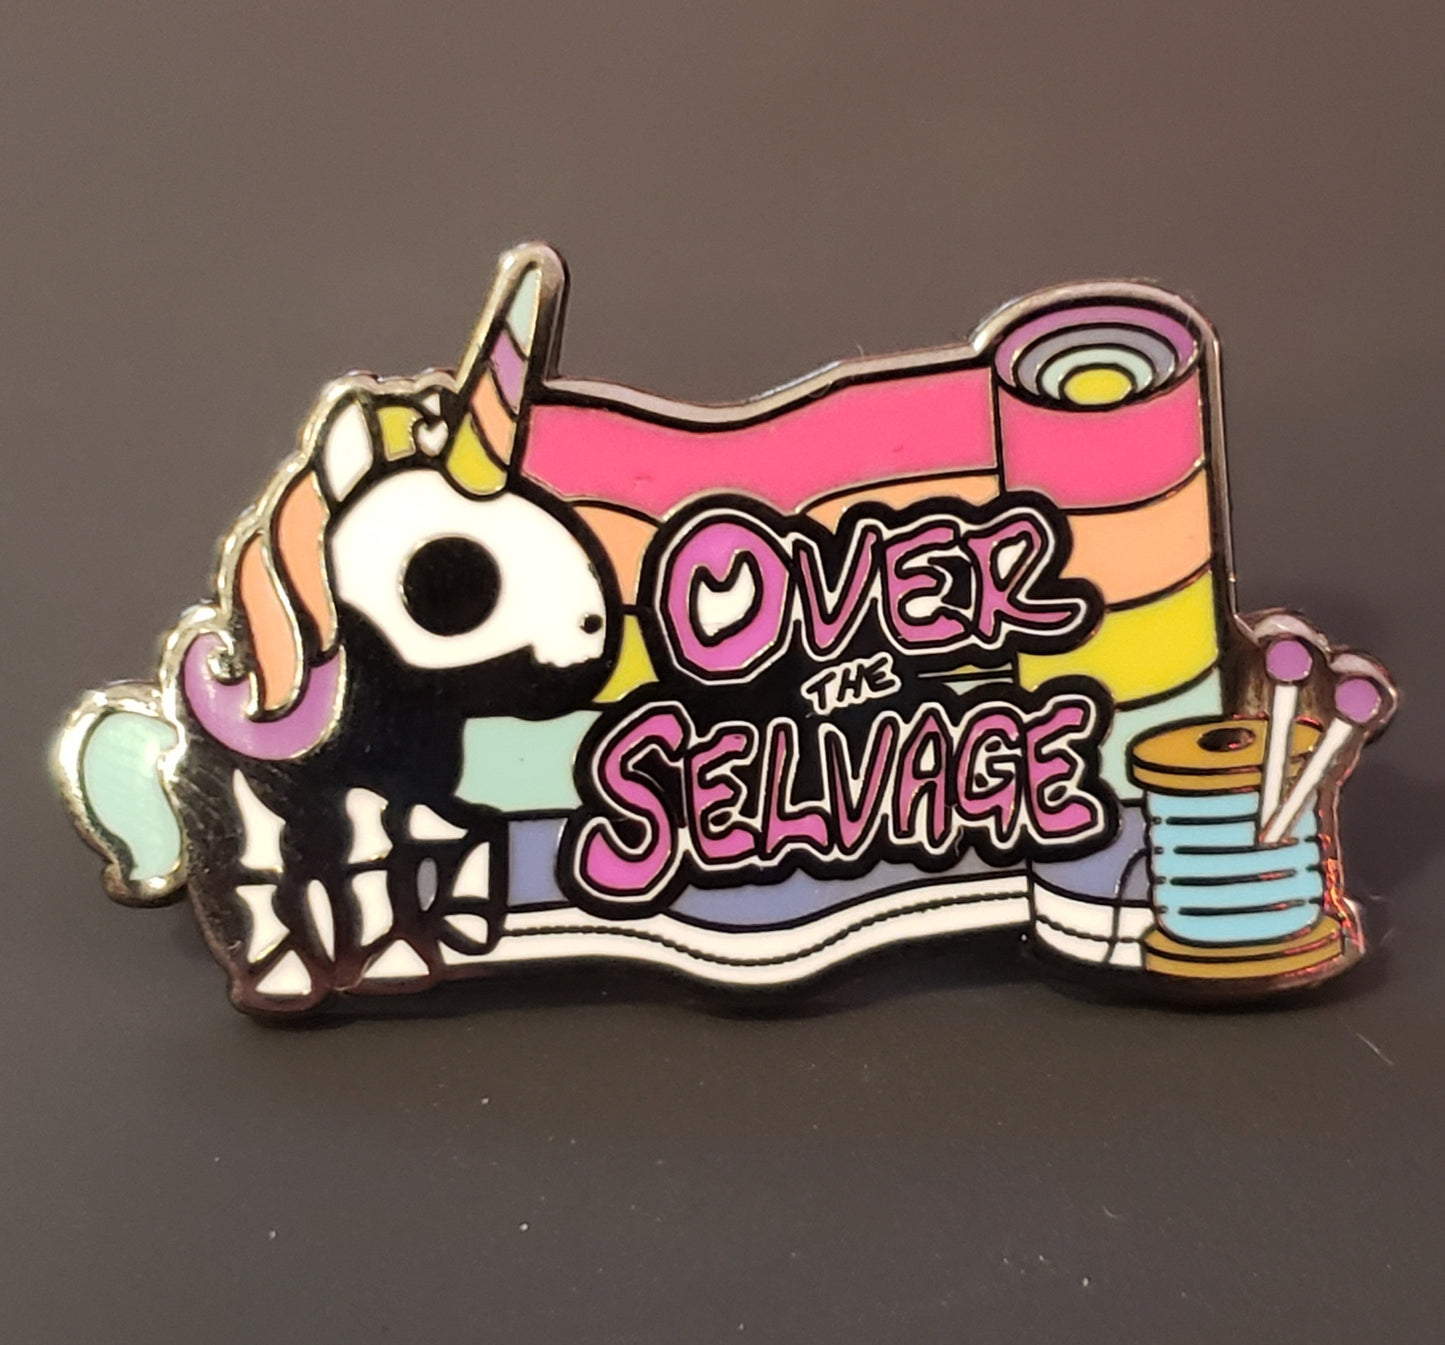 Over the Selvage Hard Enamel Pin Retail